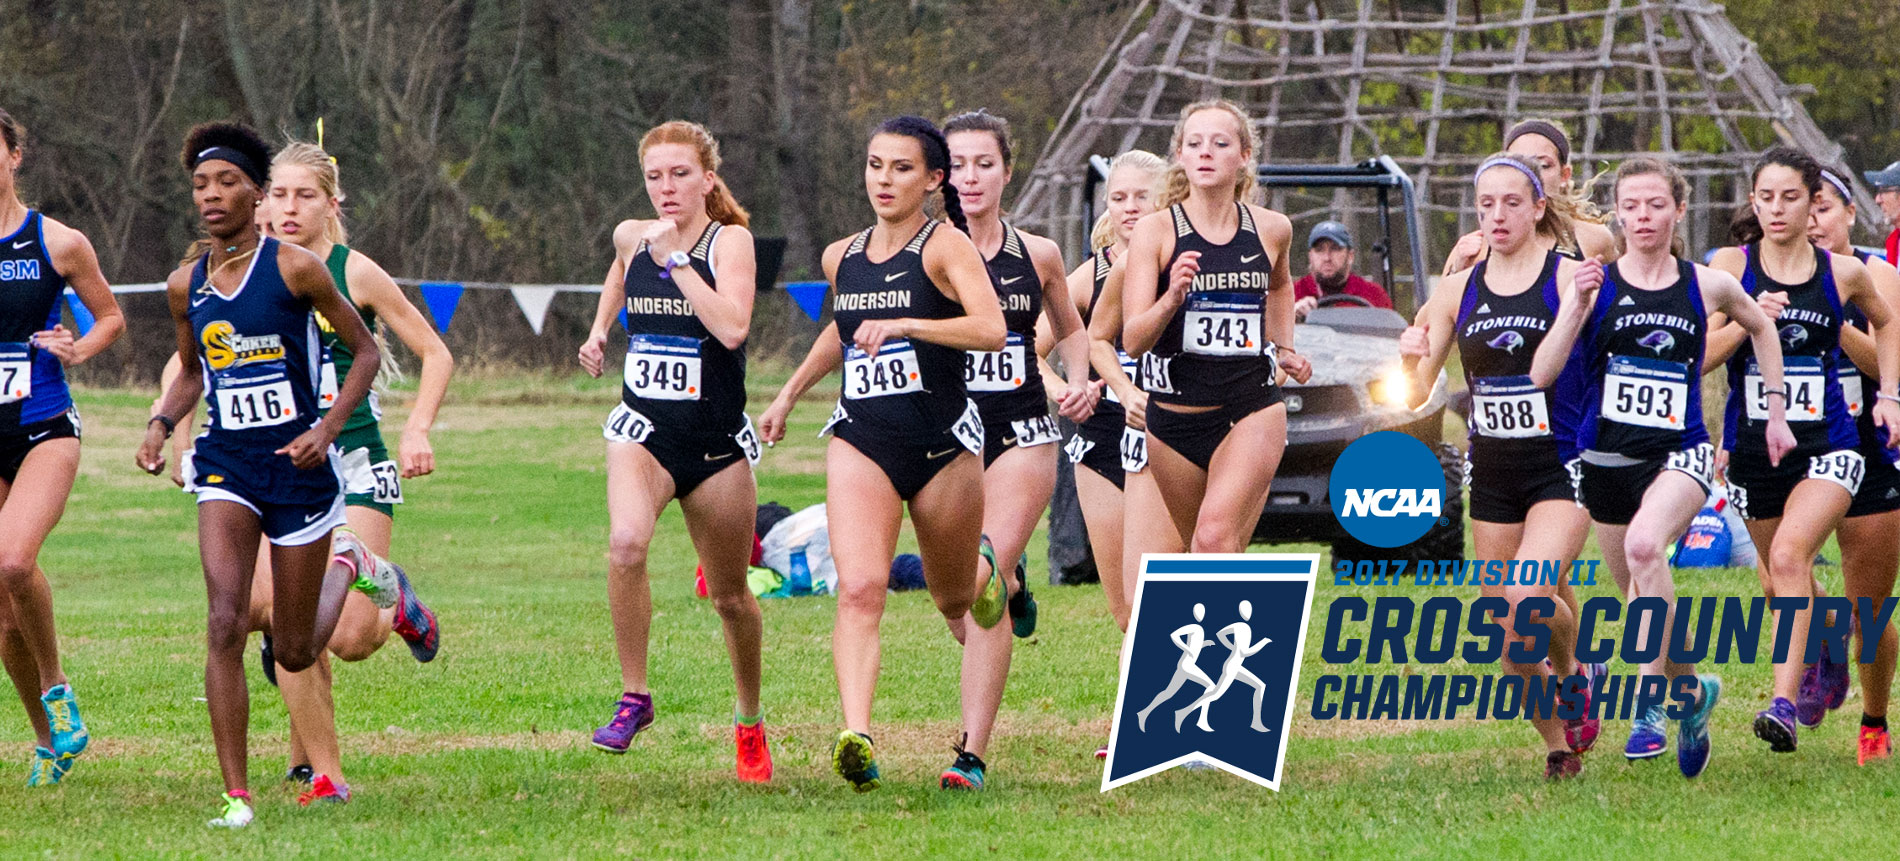 Women’s Cross Country Finishes 30th at NCAA National Championships